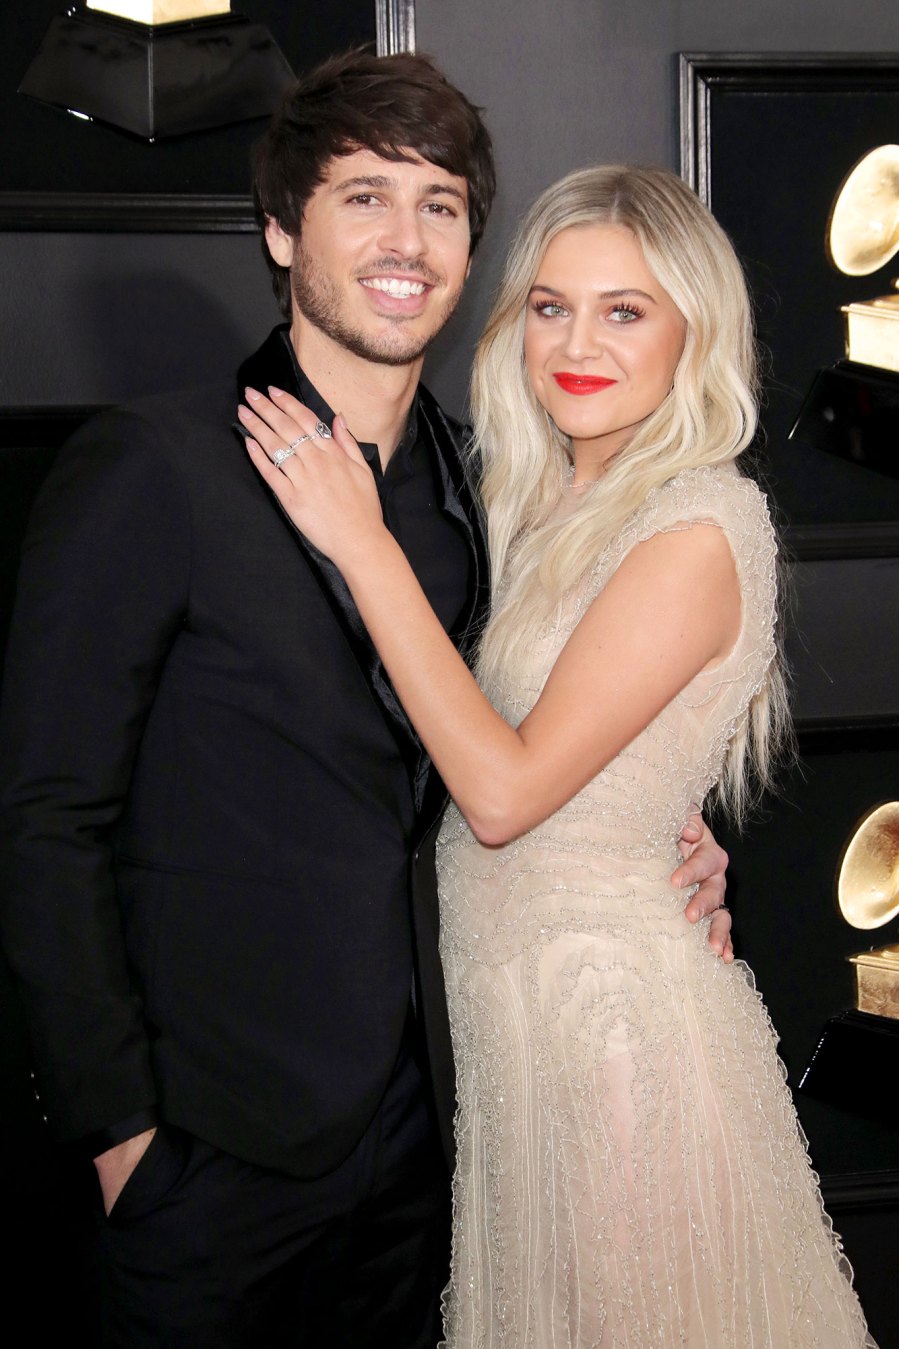 Blindsided Kelsea Ballerini Details Failed Marriage to Morgan Evans in Telling Six-Song EP